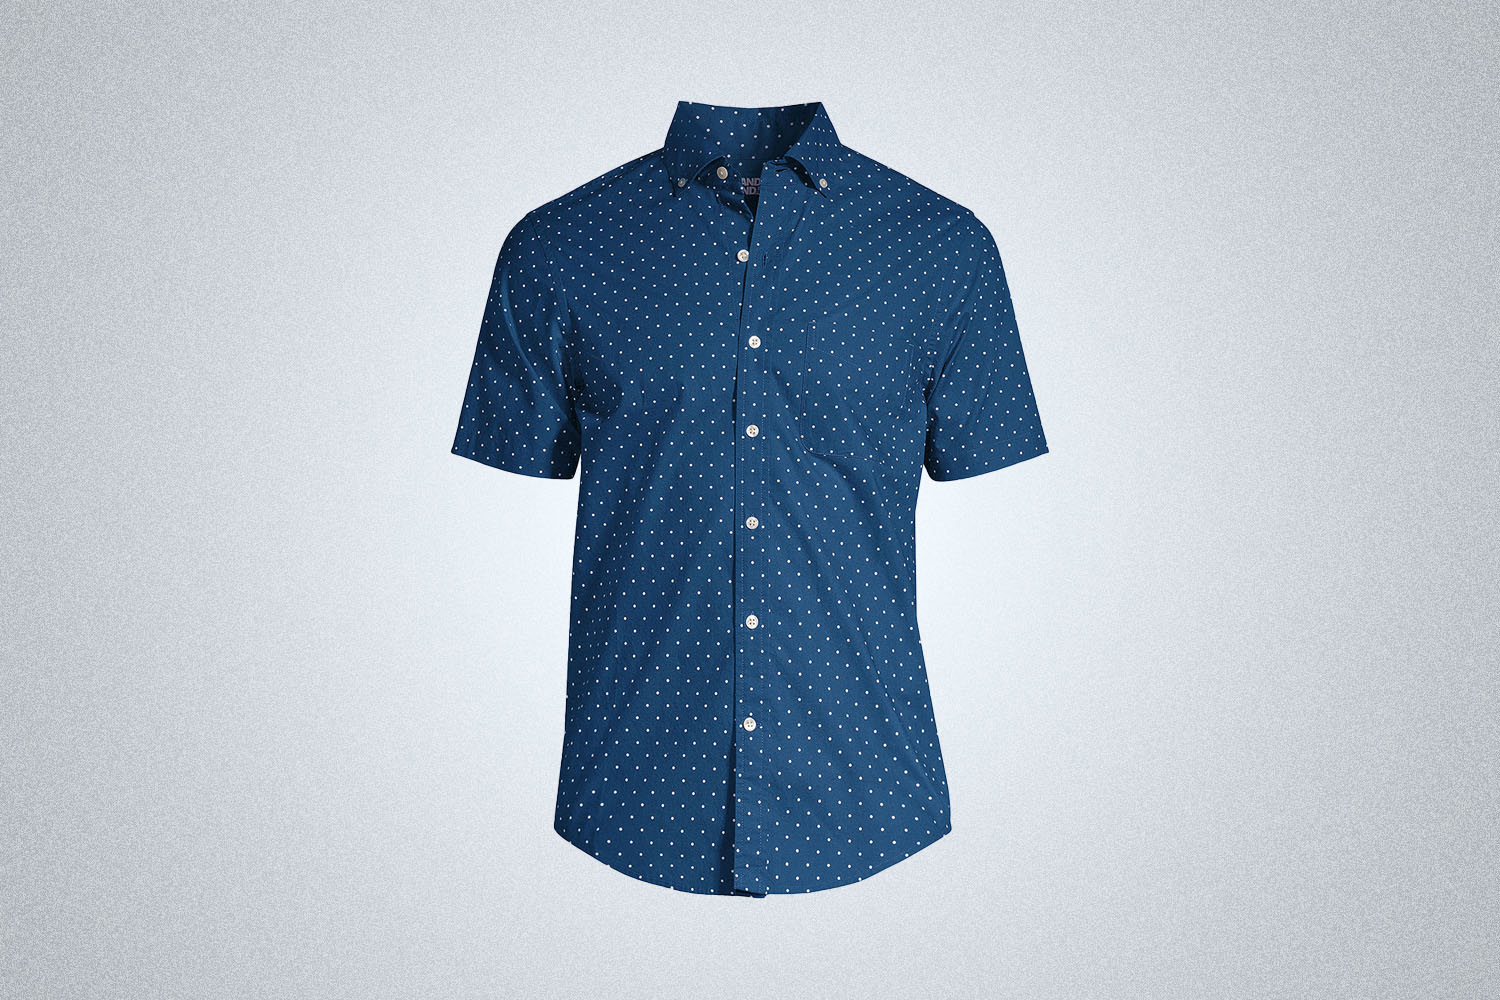 a short-sleeve blue dot button up shirt from Land's End on a grey background